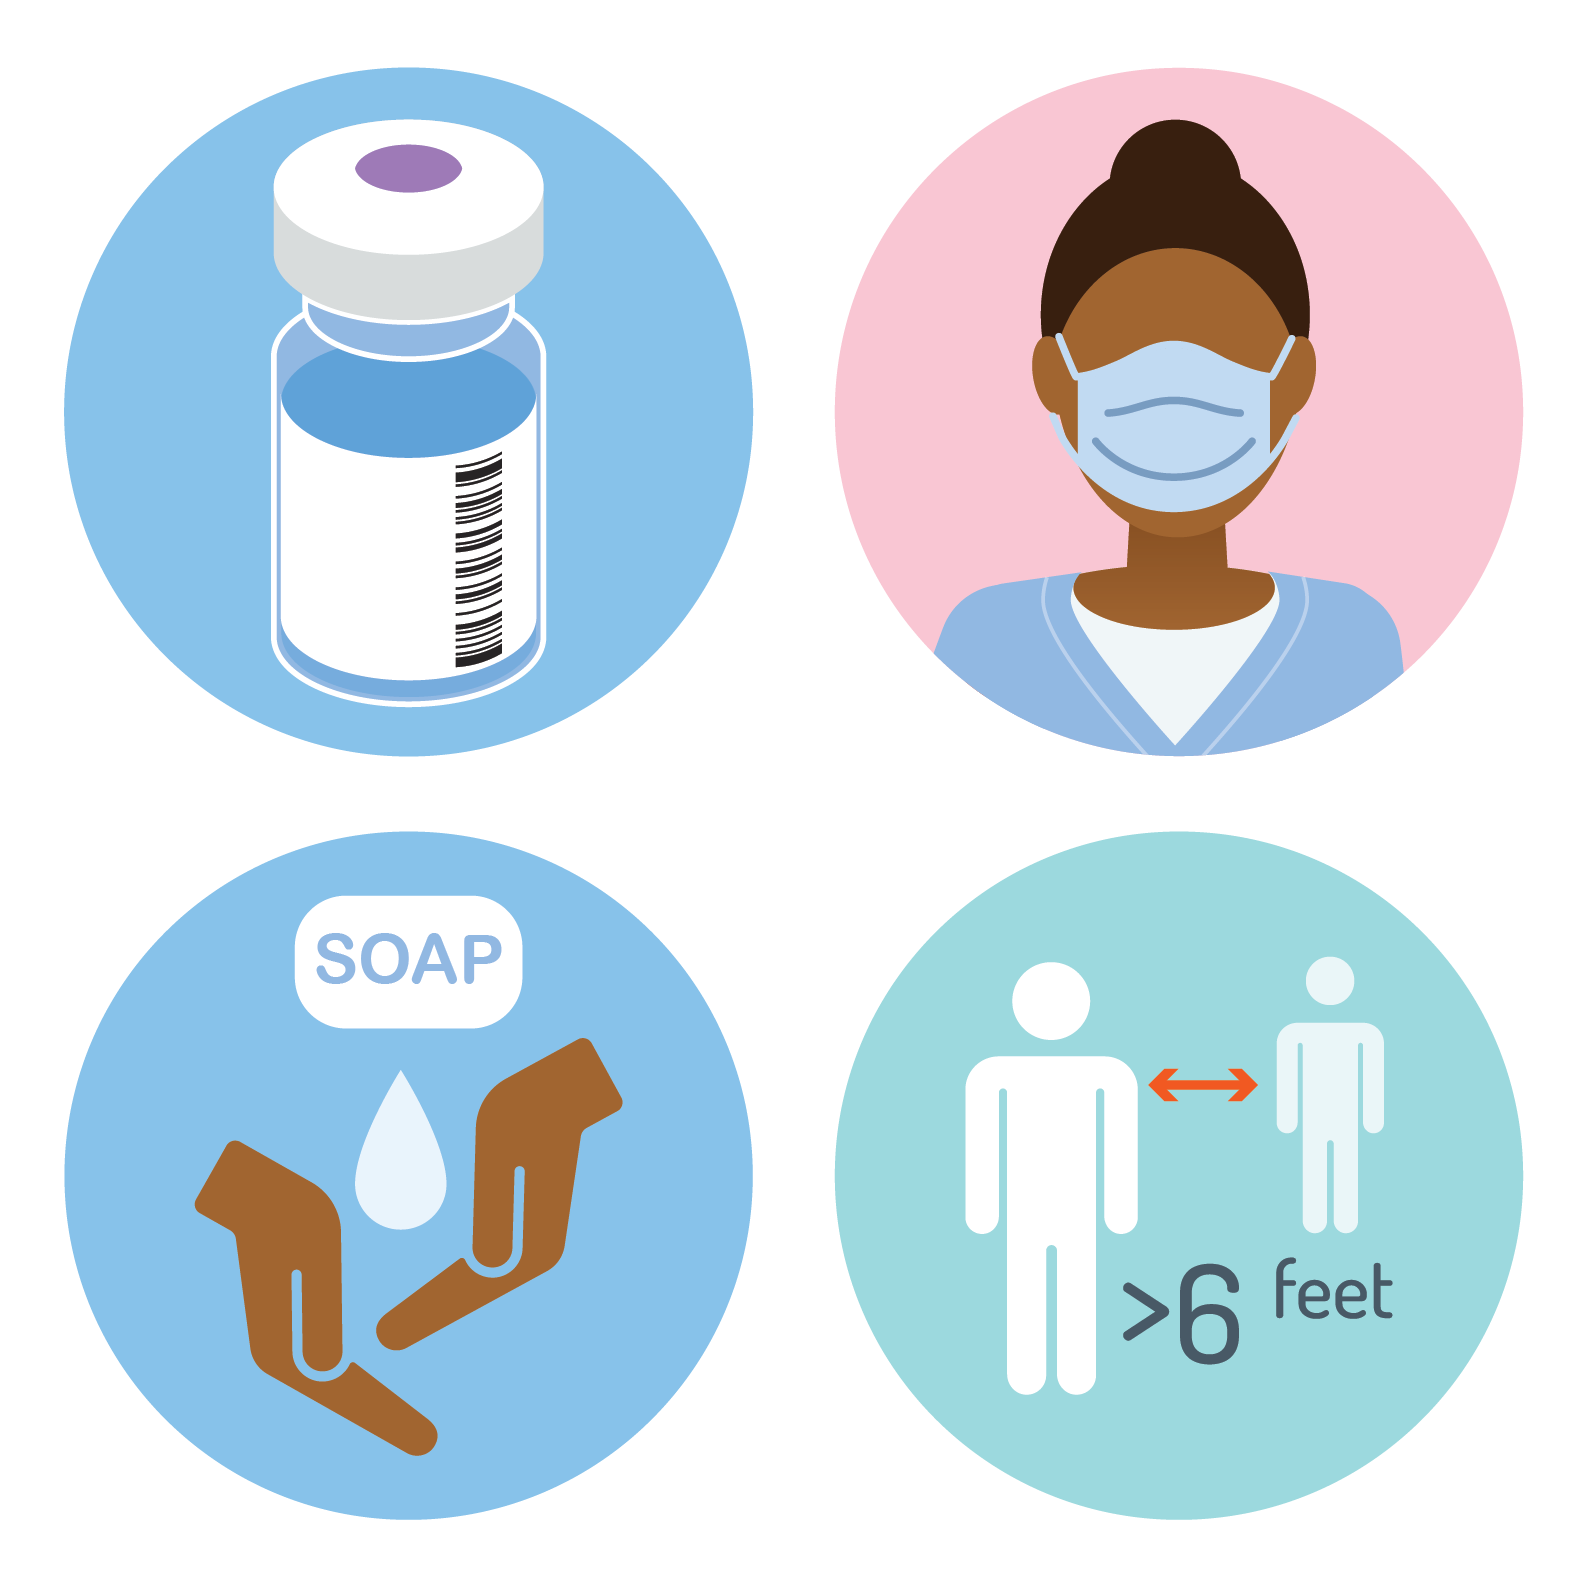 illustrations of vaccine, person wearing a mask, hand washing, and social distancing